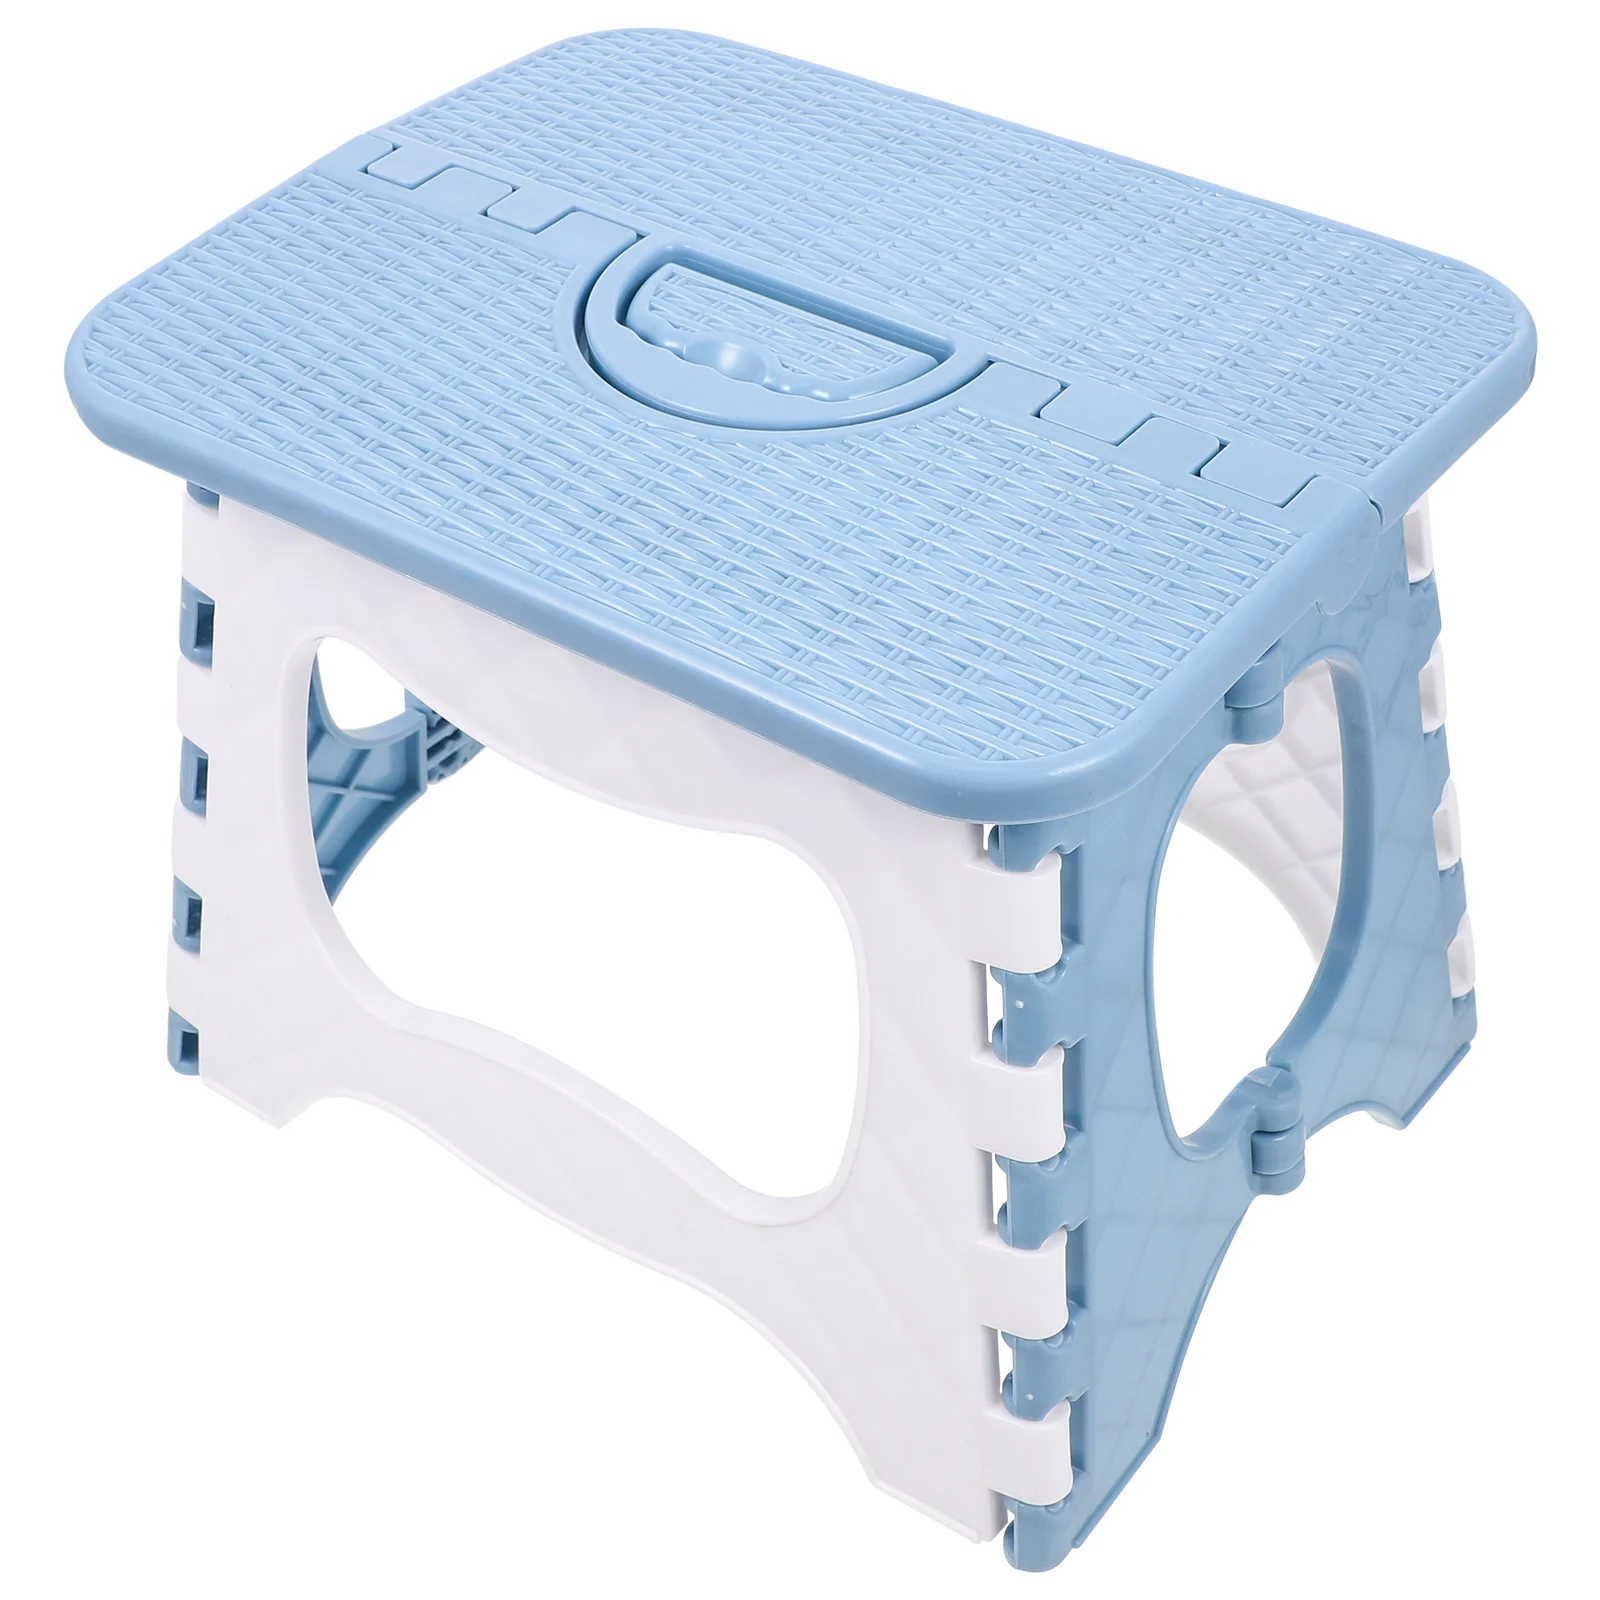 

Kitchen Stepping Stool Folding Chairs Collapsible Stools Adults Foldable Fishing Furniture Portable